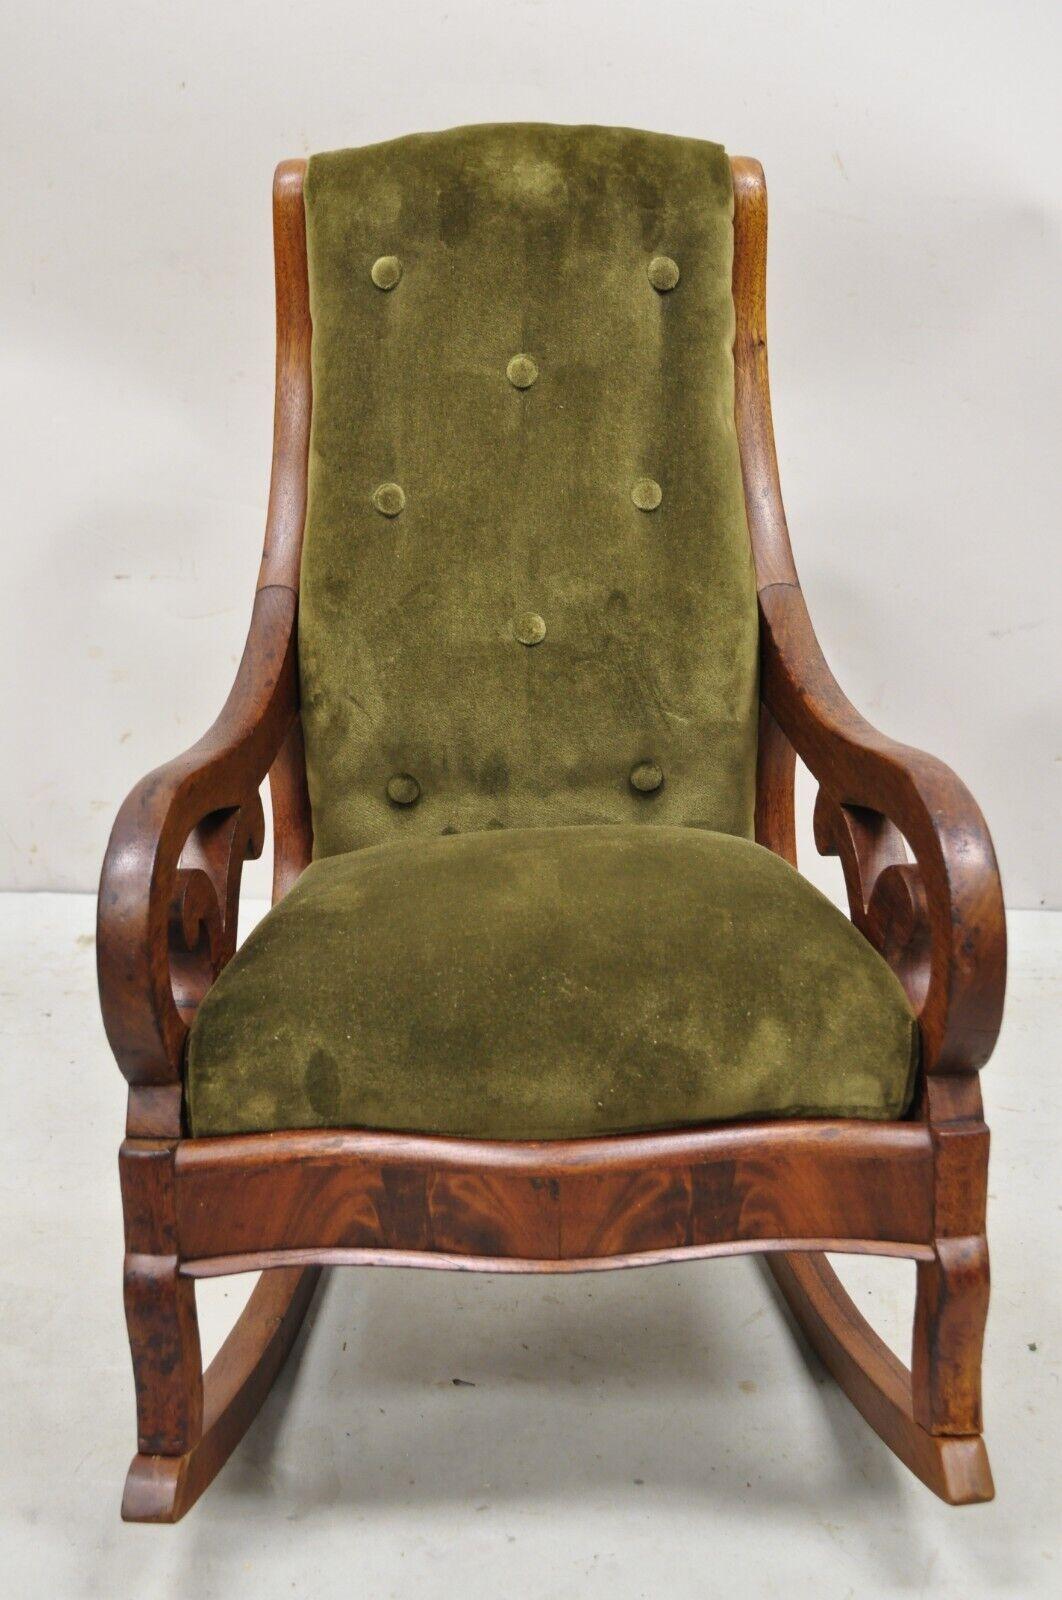 Antique Victorian childs small rocking chair walnut rocker green mohair. Item features original green upholstery, solid wood frame, beautiful wood grain, very nice antique item, quality American craftsmanship. Circa 19th century. Measurements: 24